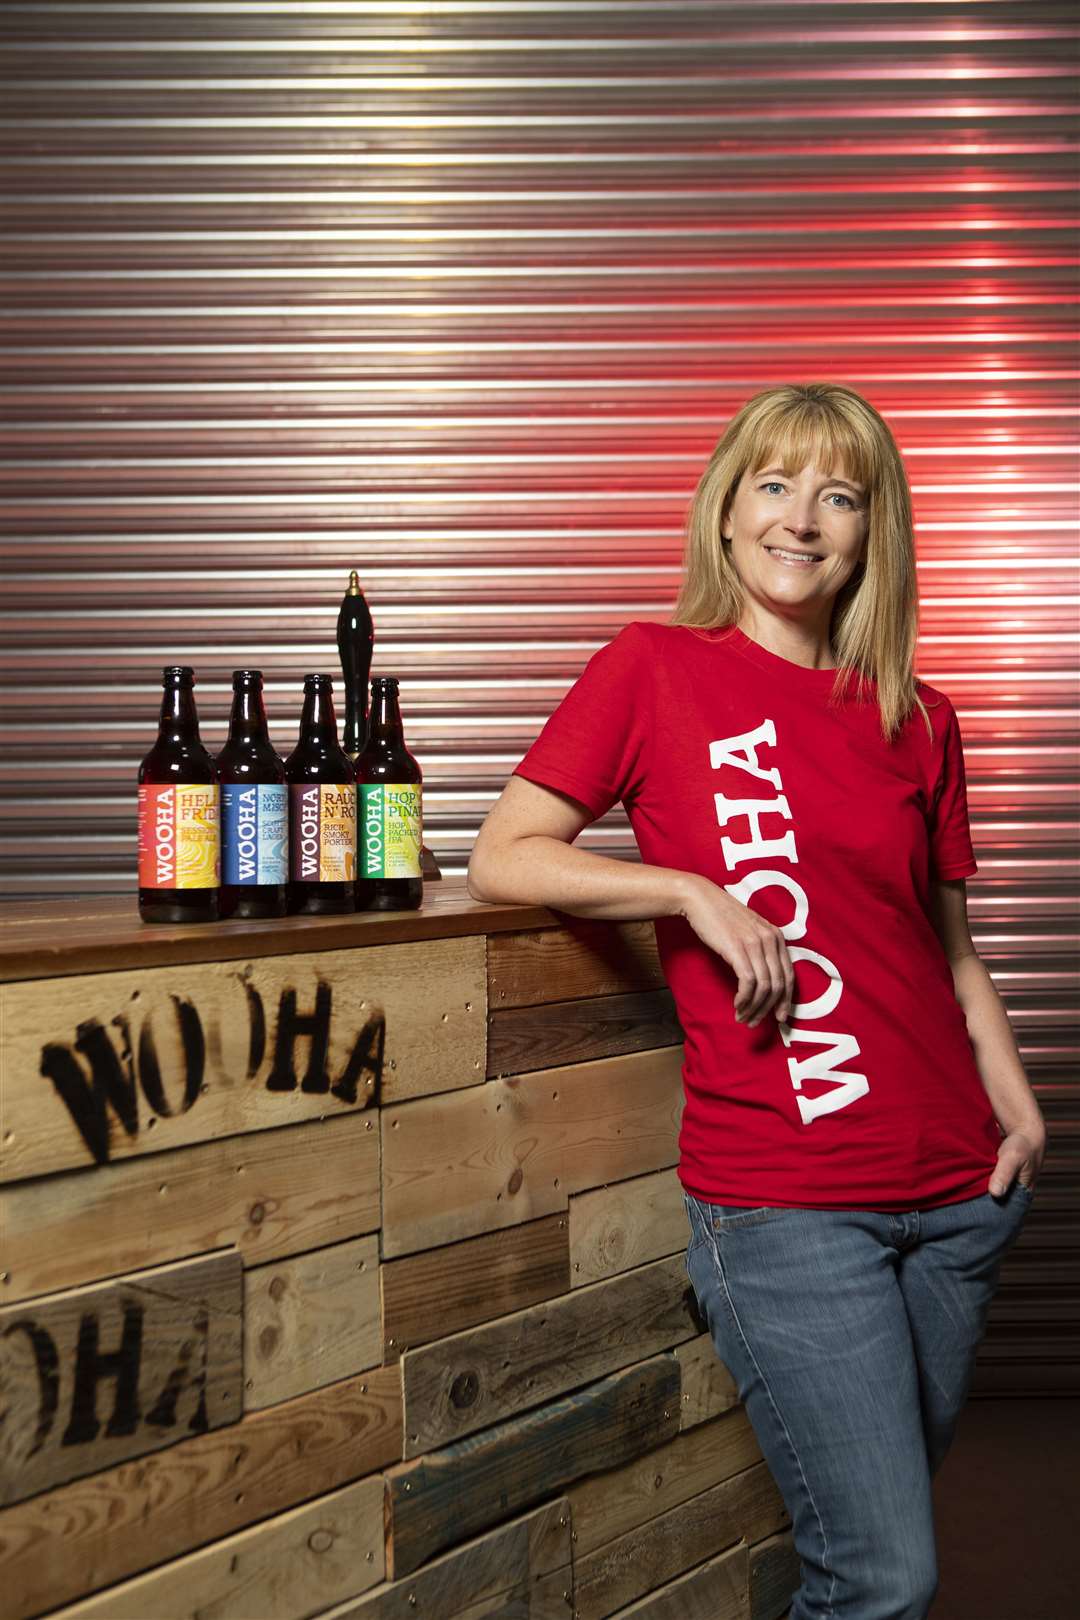 WooHa founder and chief executive, Heather McDonald.